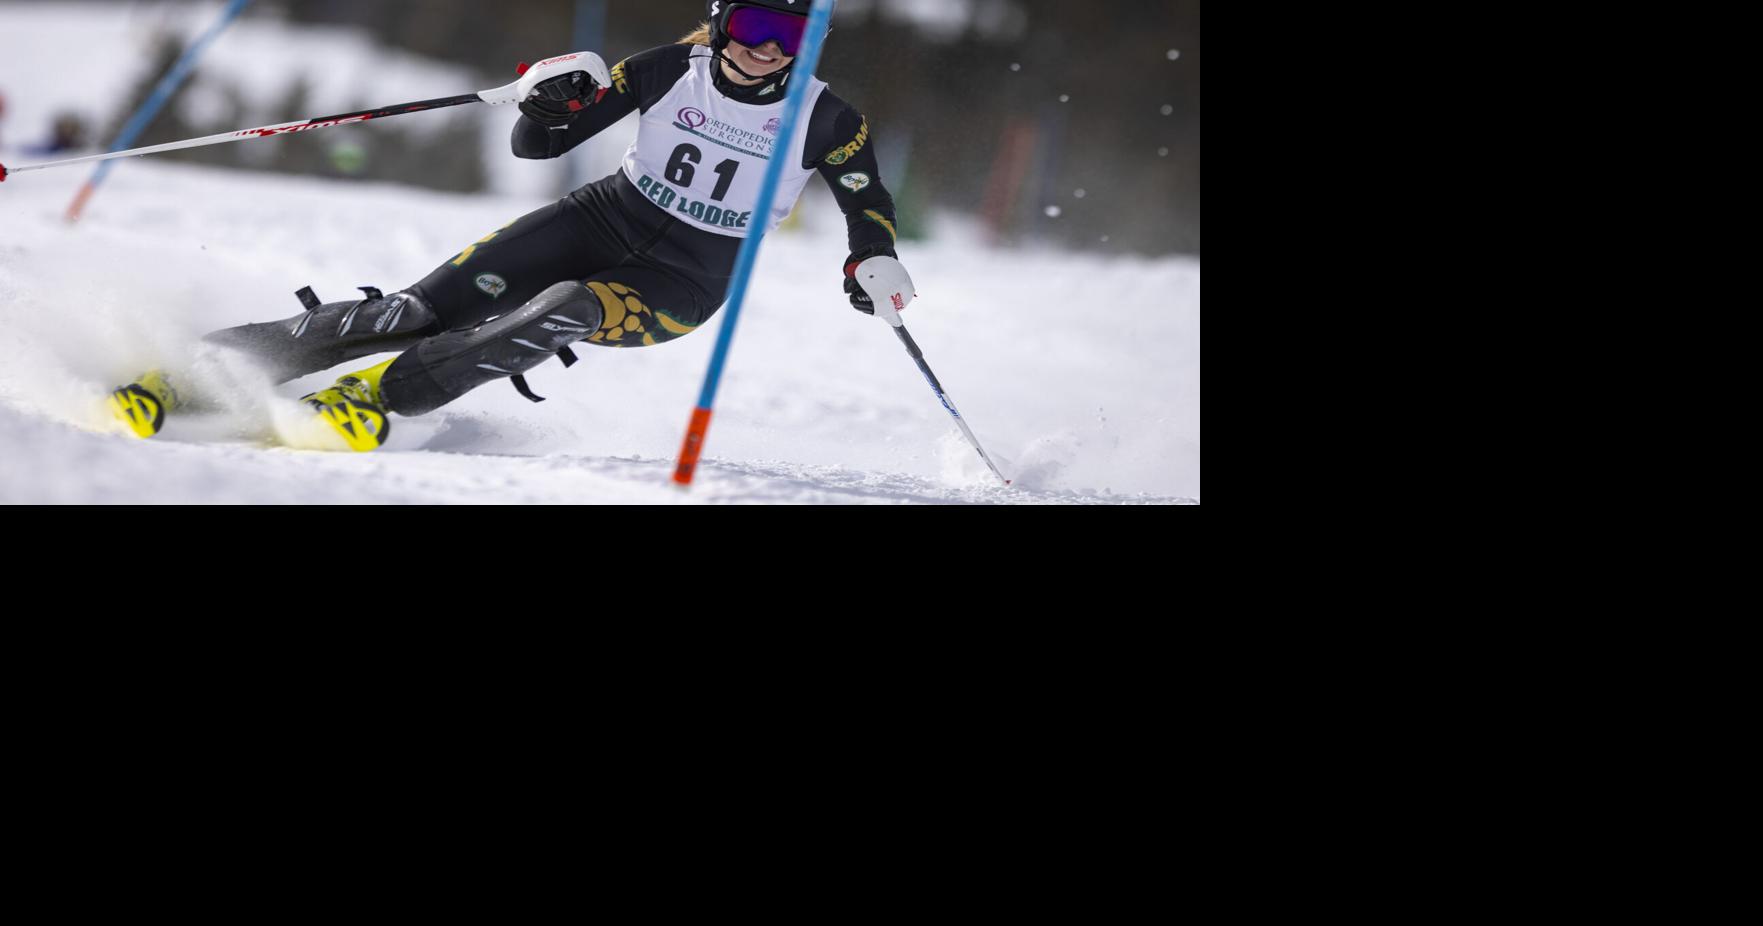 Rocky ski racing gets meet at Red Lodge underway Friday